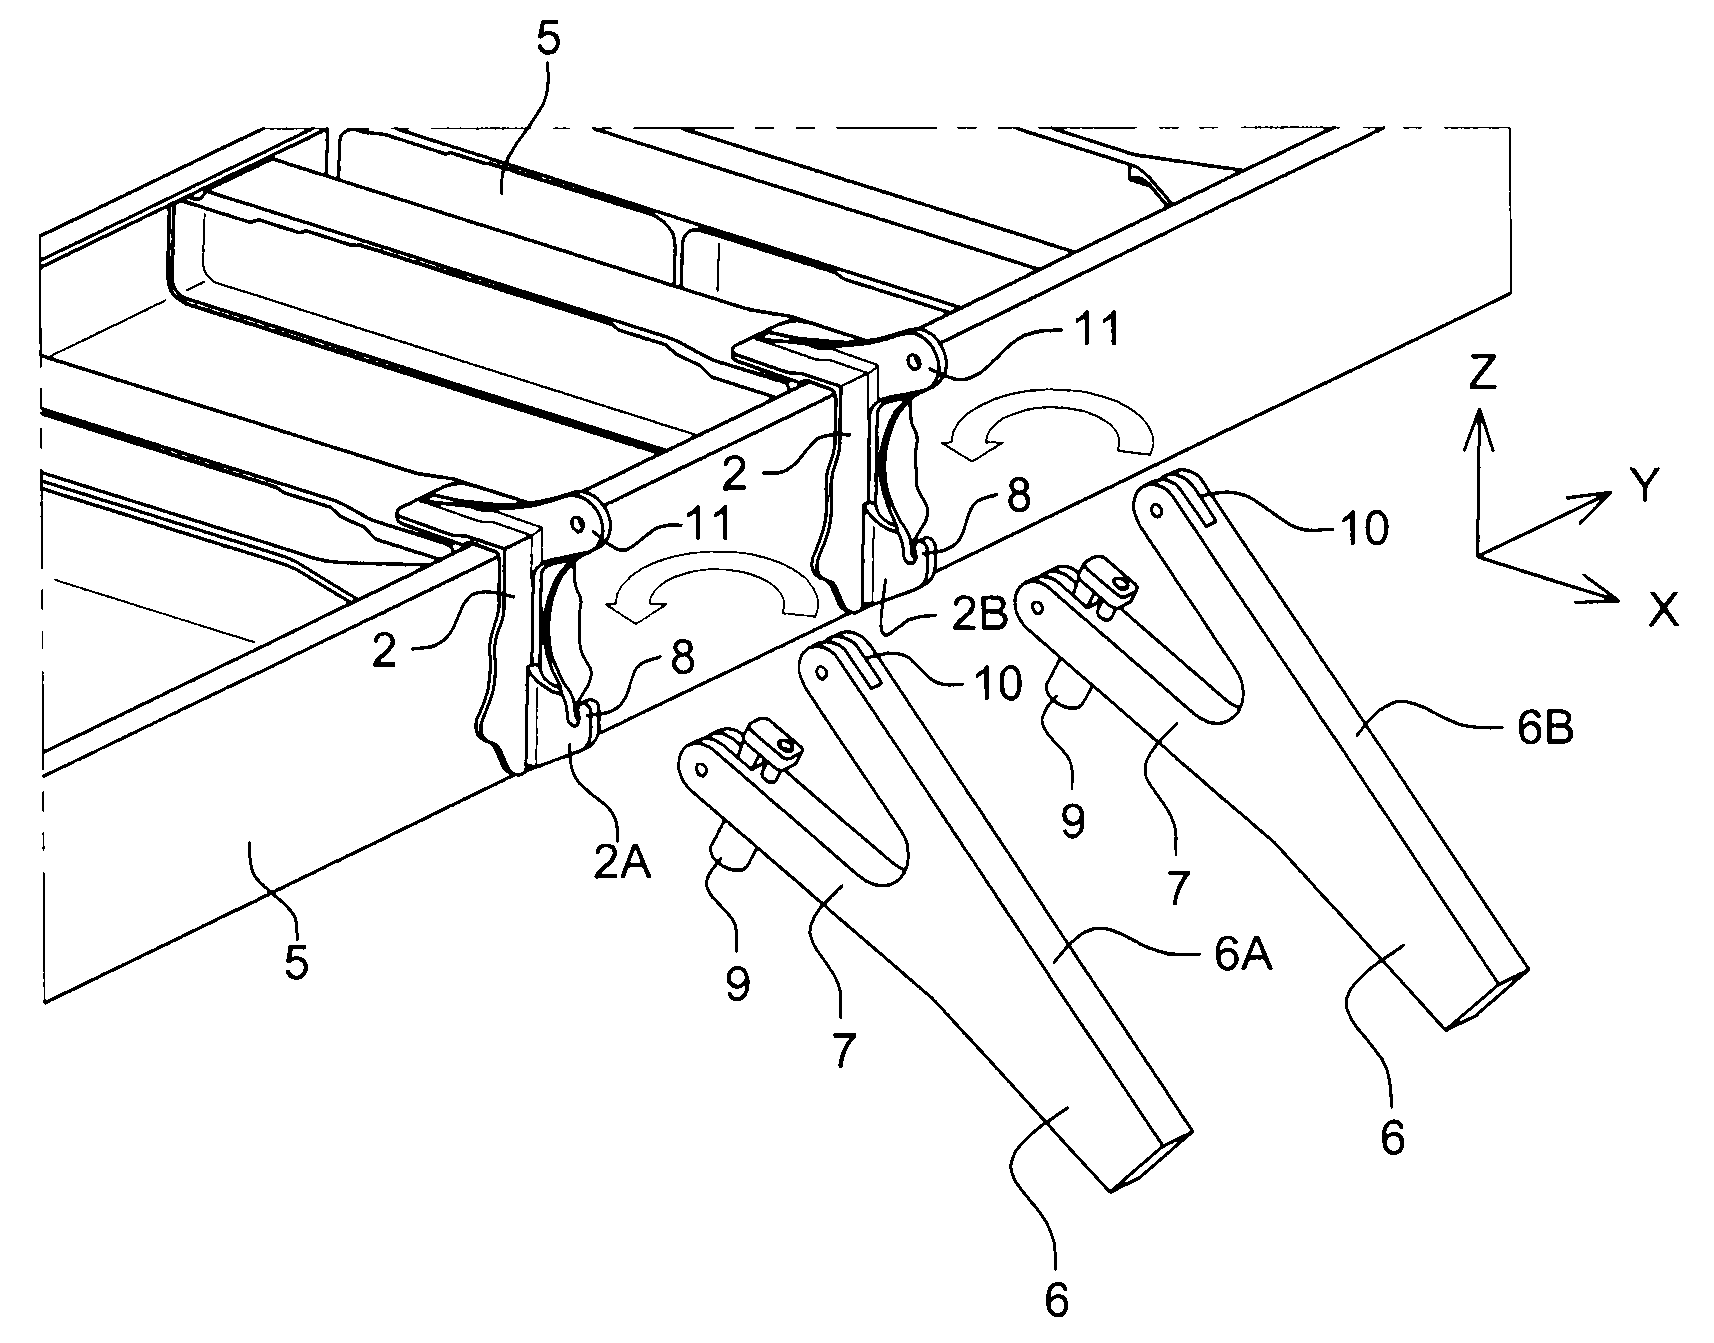 Attachment interface device for attaching mobile equipment to an aircraft structure